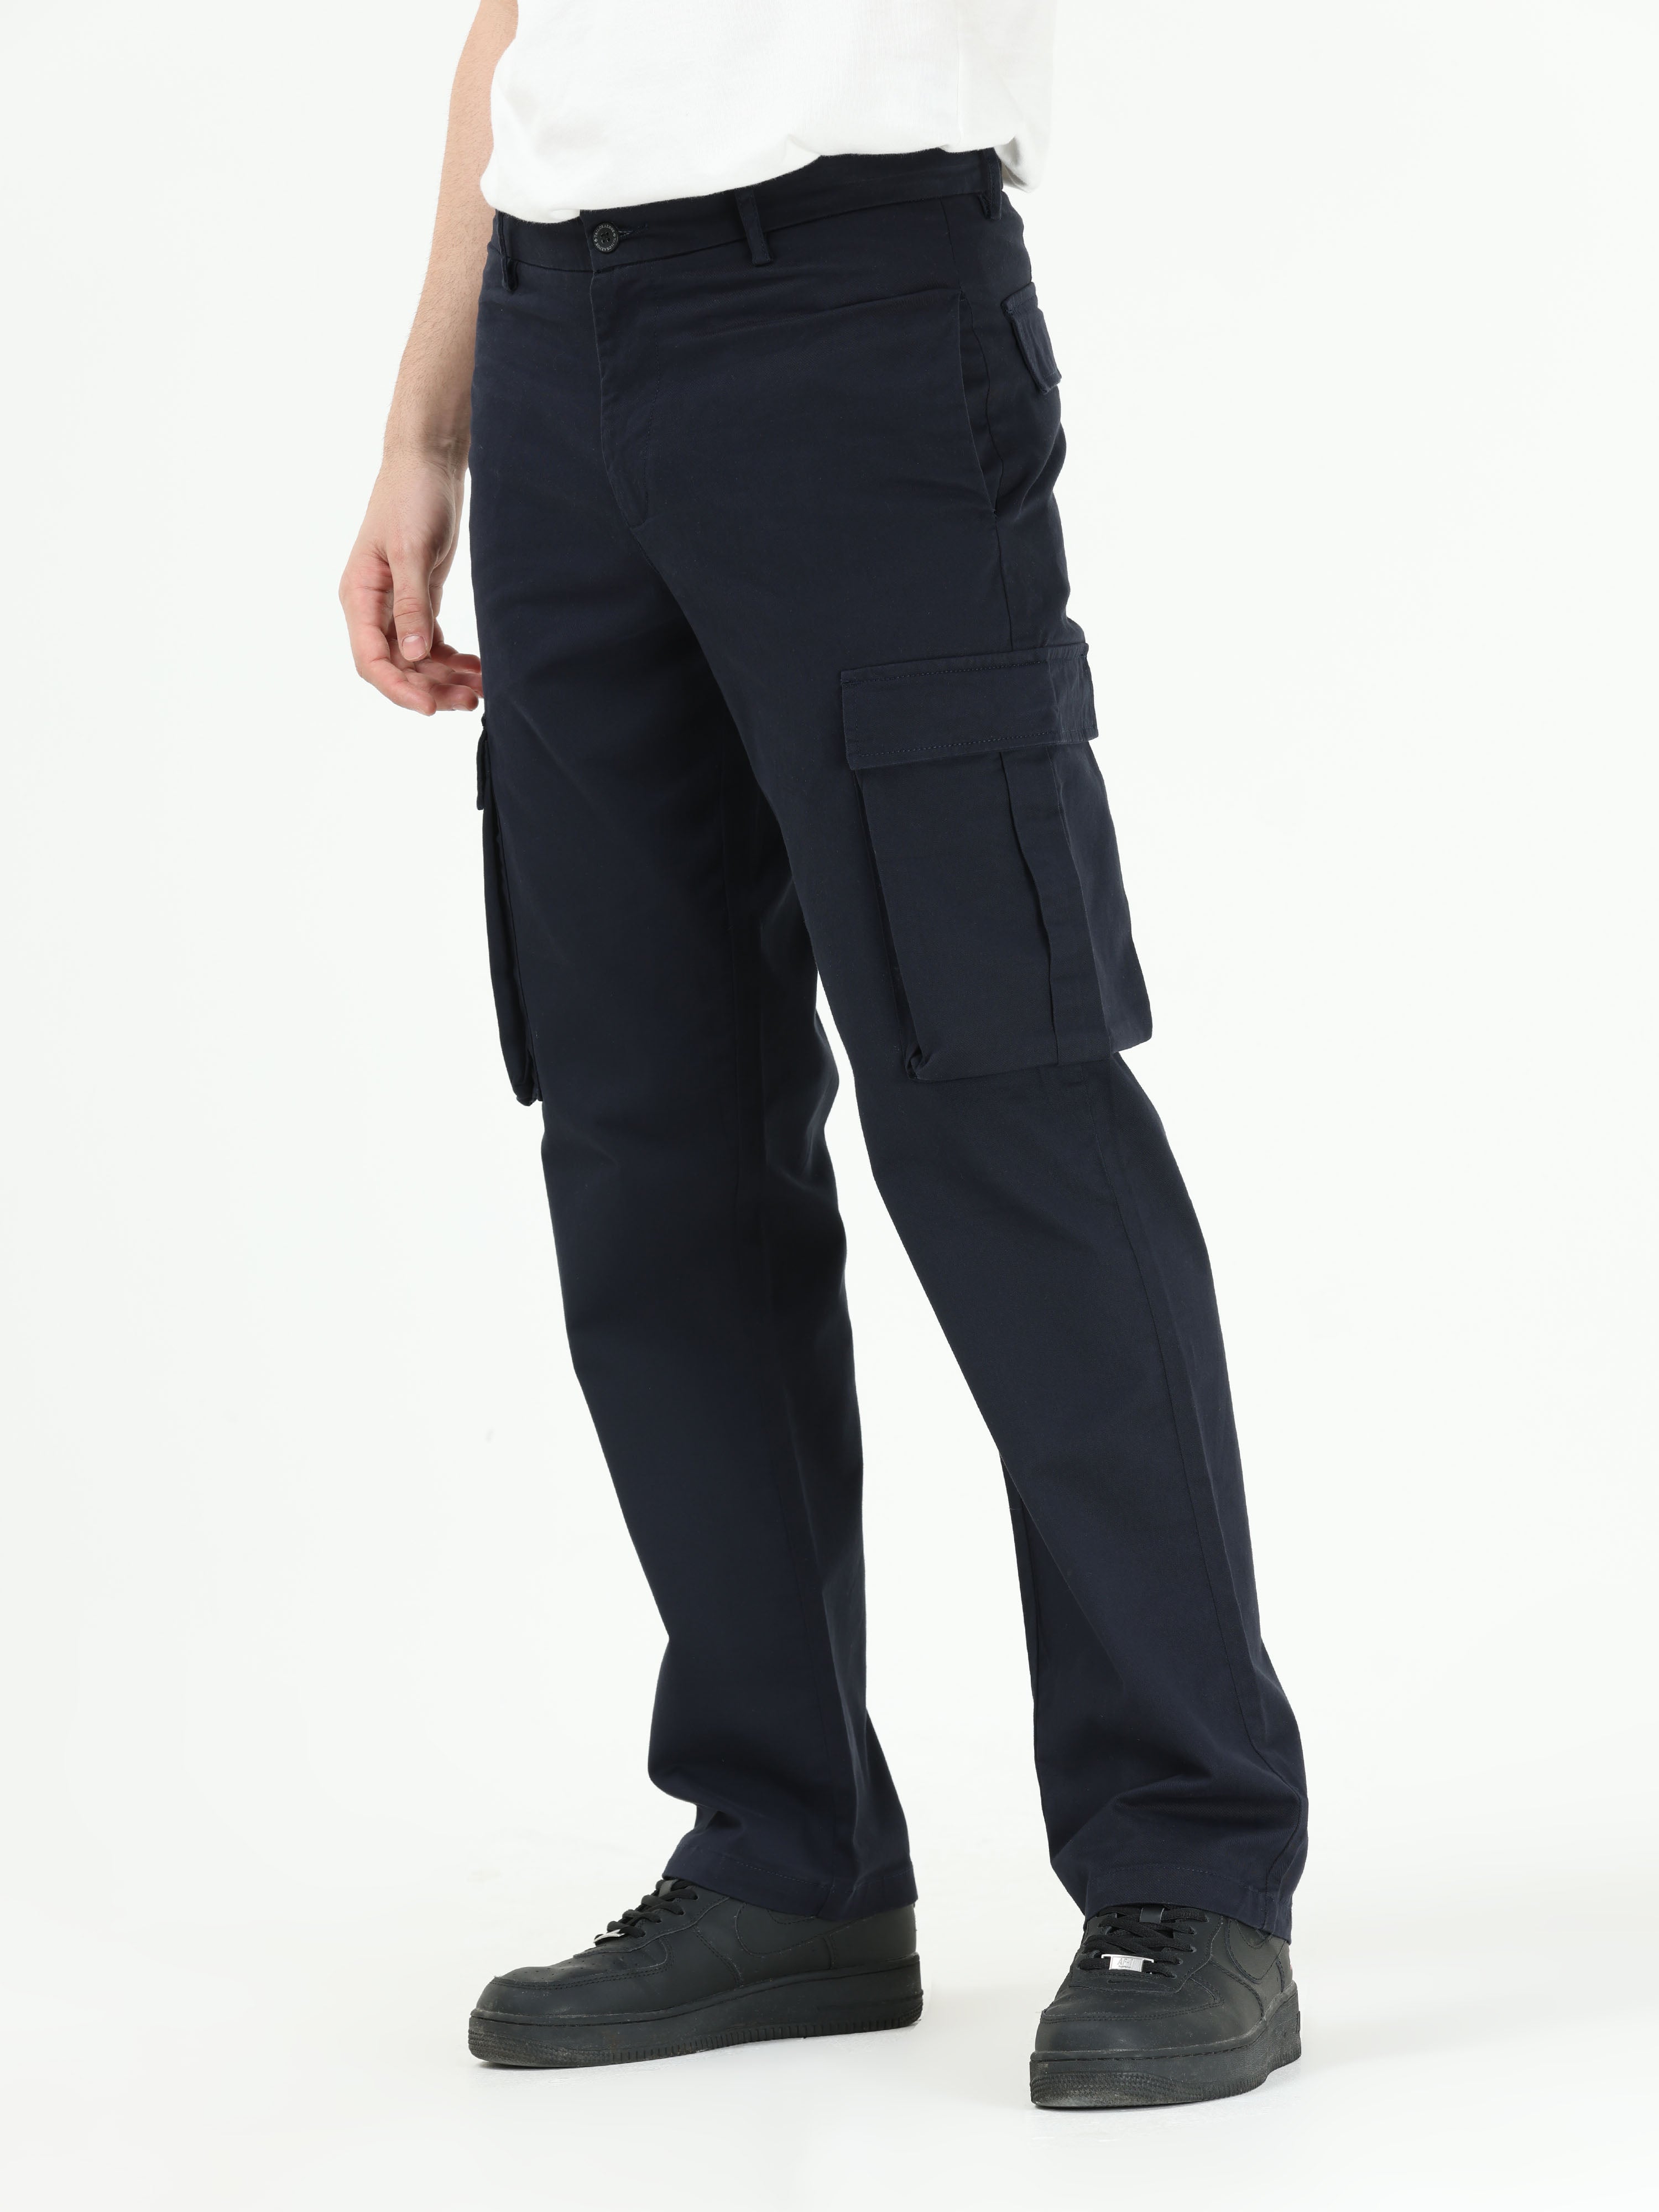 Finest Twill Navy Baggy Fit Cargo